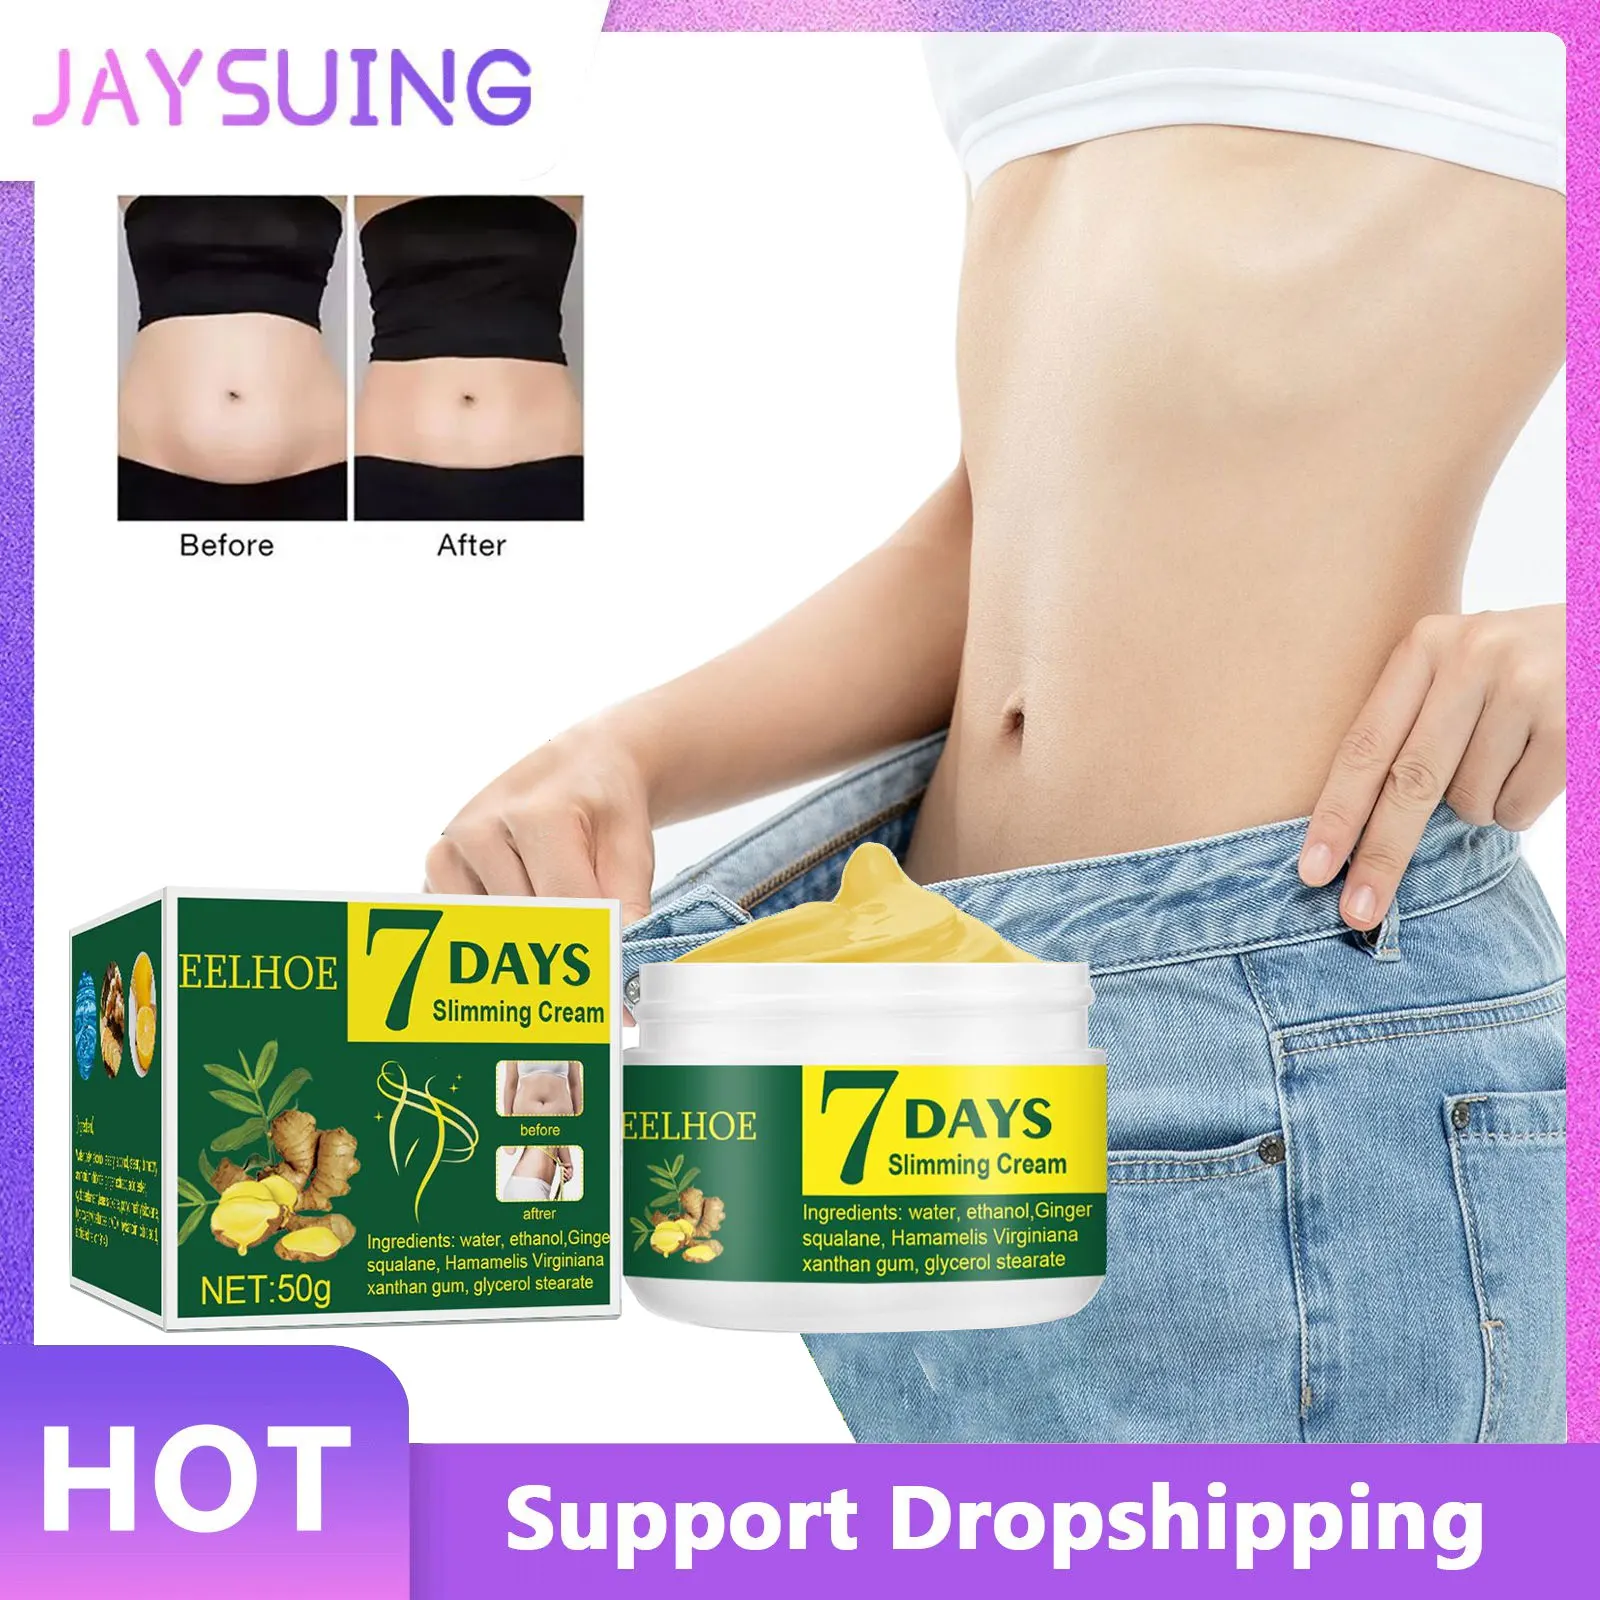 

Body Firming Cream Loss Weight Tightening Abdominal Muscle Nourishing Slimming Belly Legs Arms Massage Shaping Fat Burning Cream